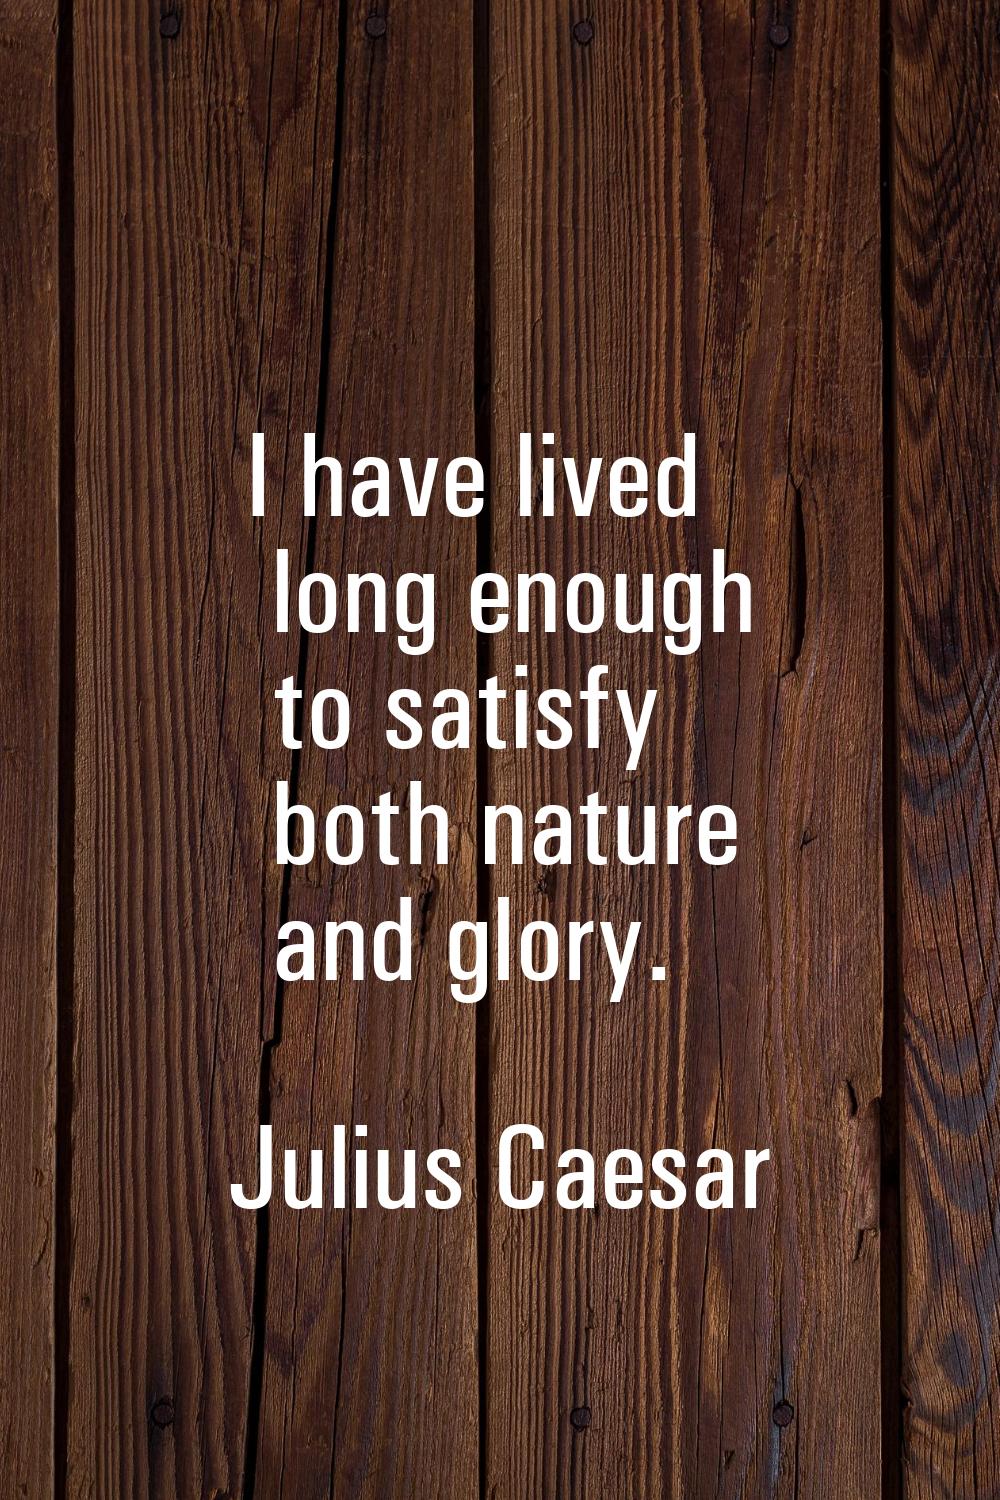 I have lived long enough to satisfy both nature and glory.